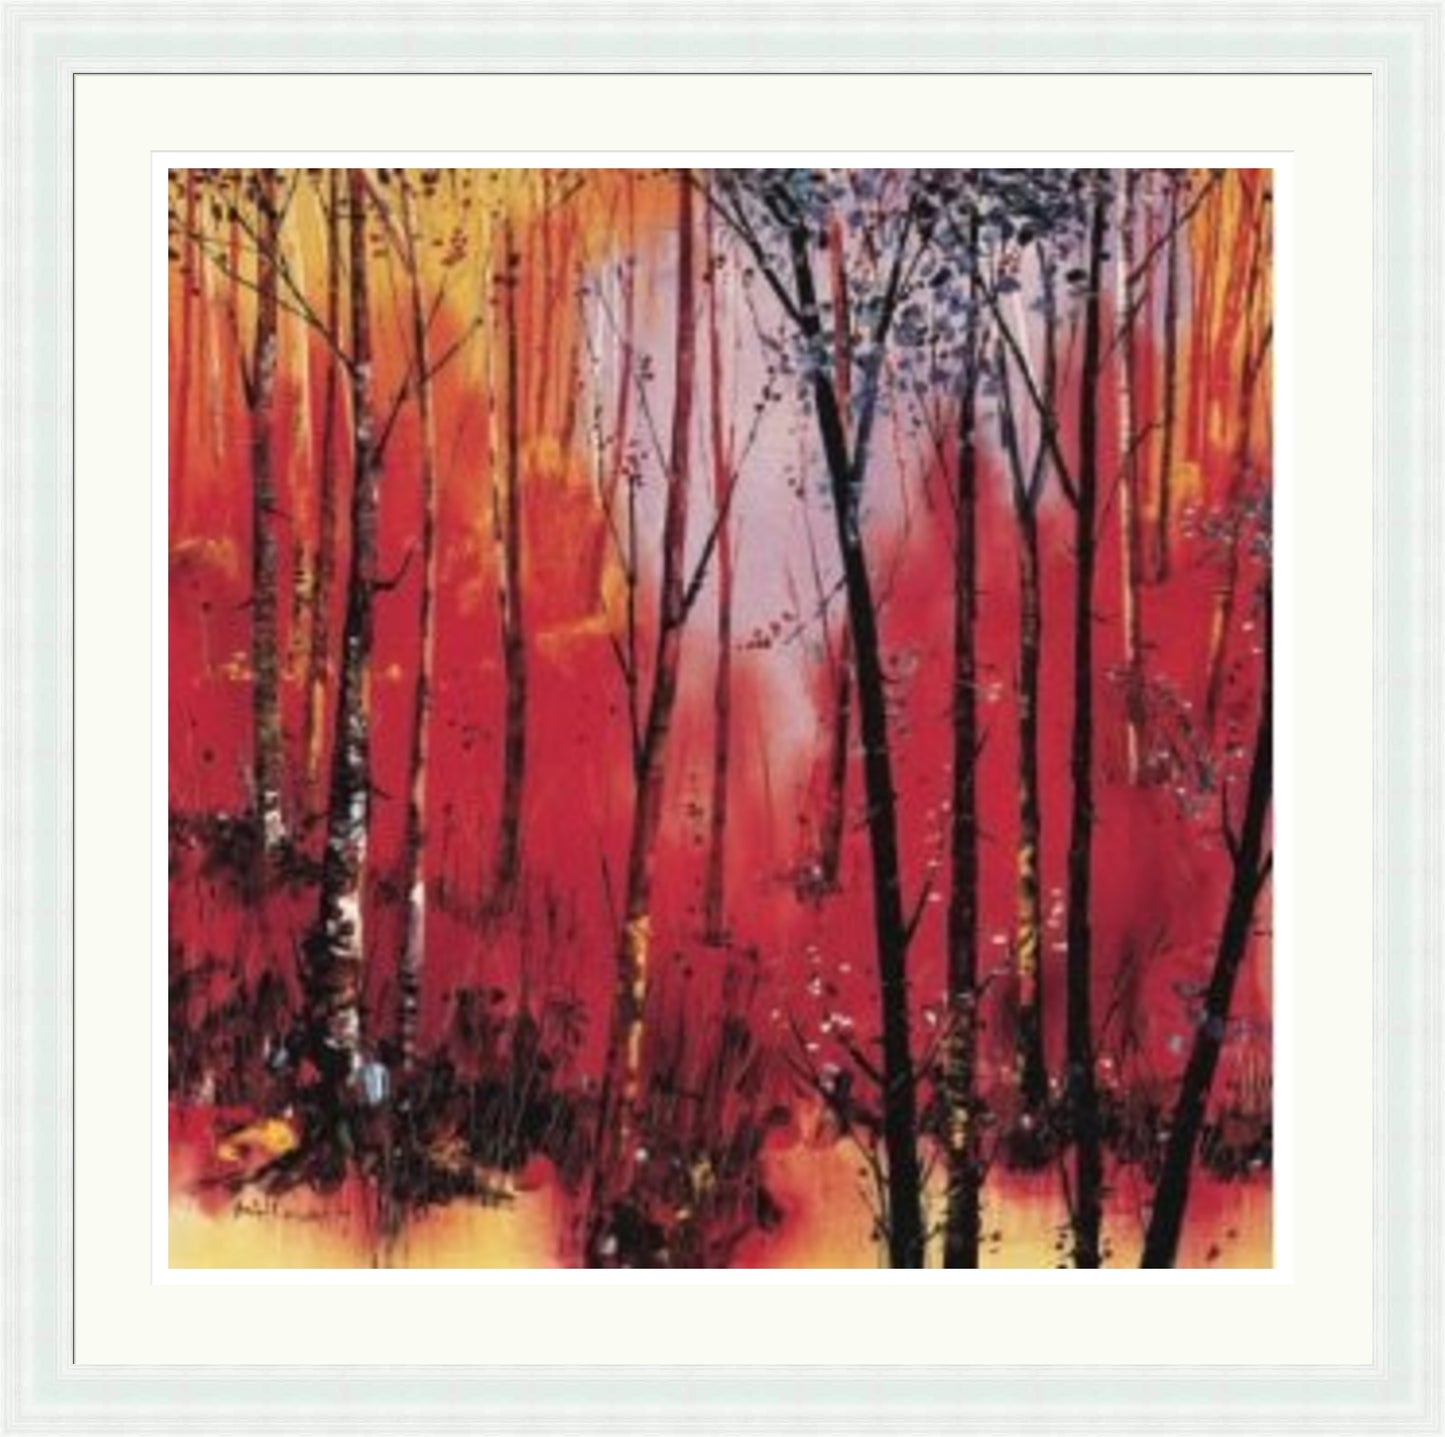 Birch and Reds Limited Edition Art Print By Daniel Campbell